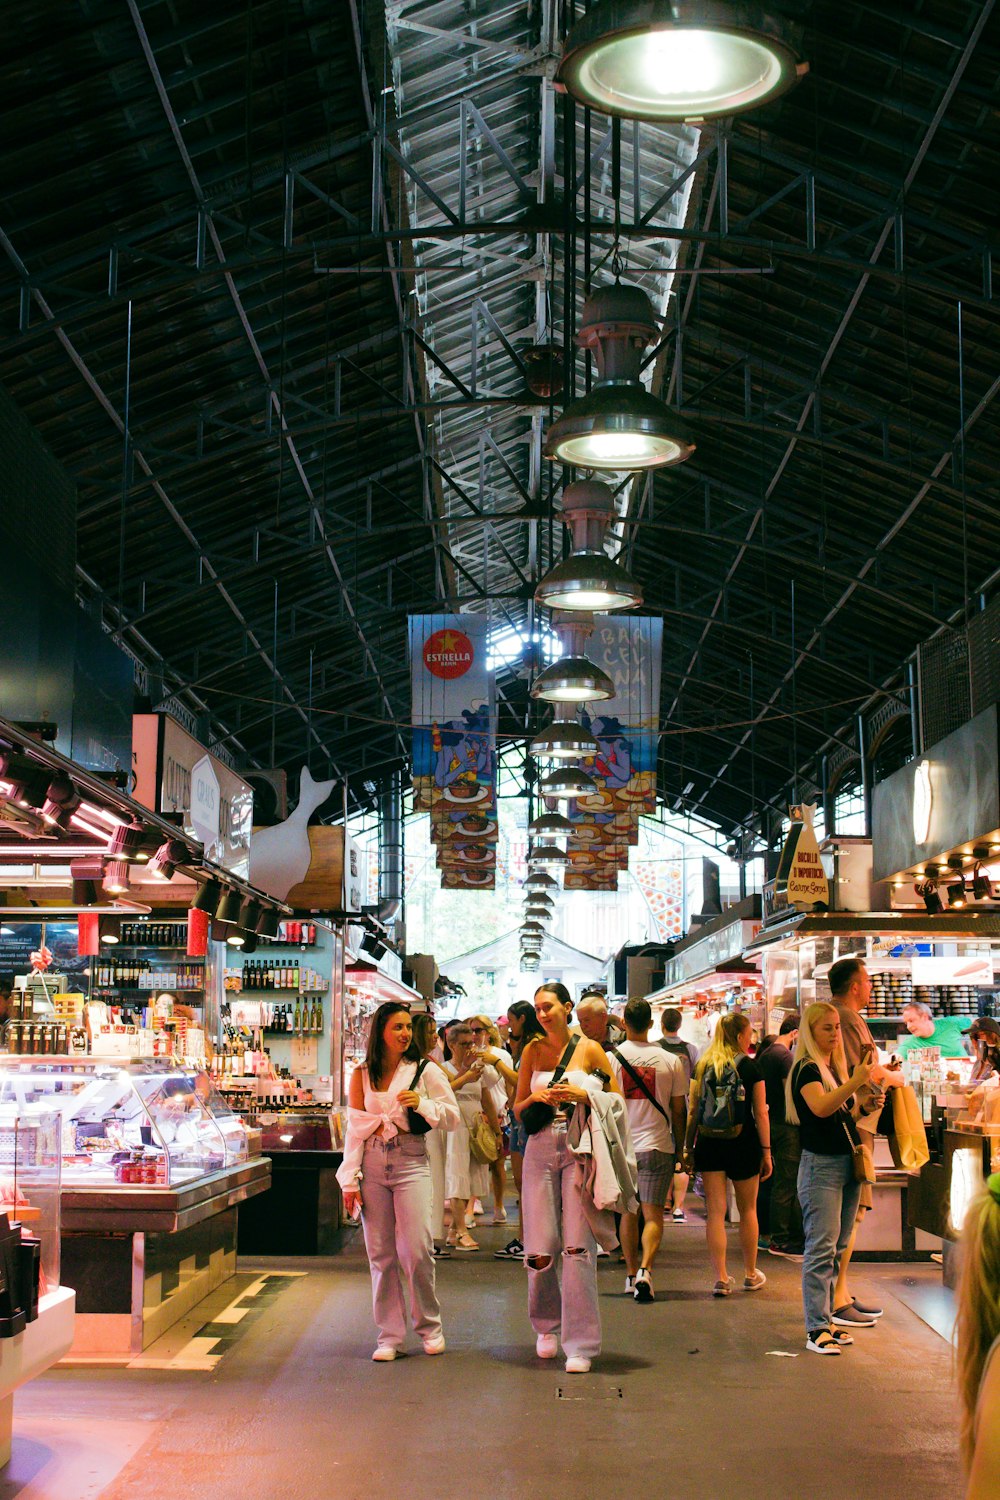 a group of people in a large room with a ceiling of lights